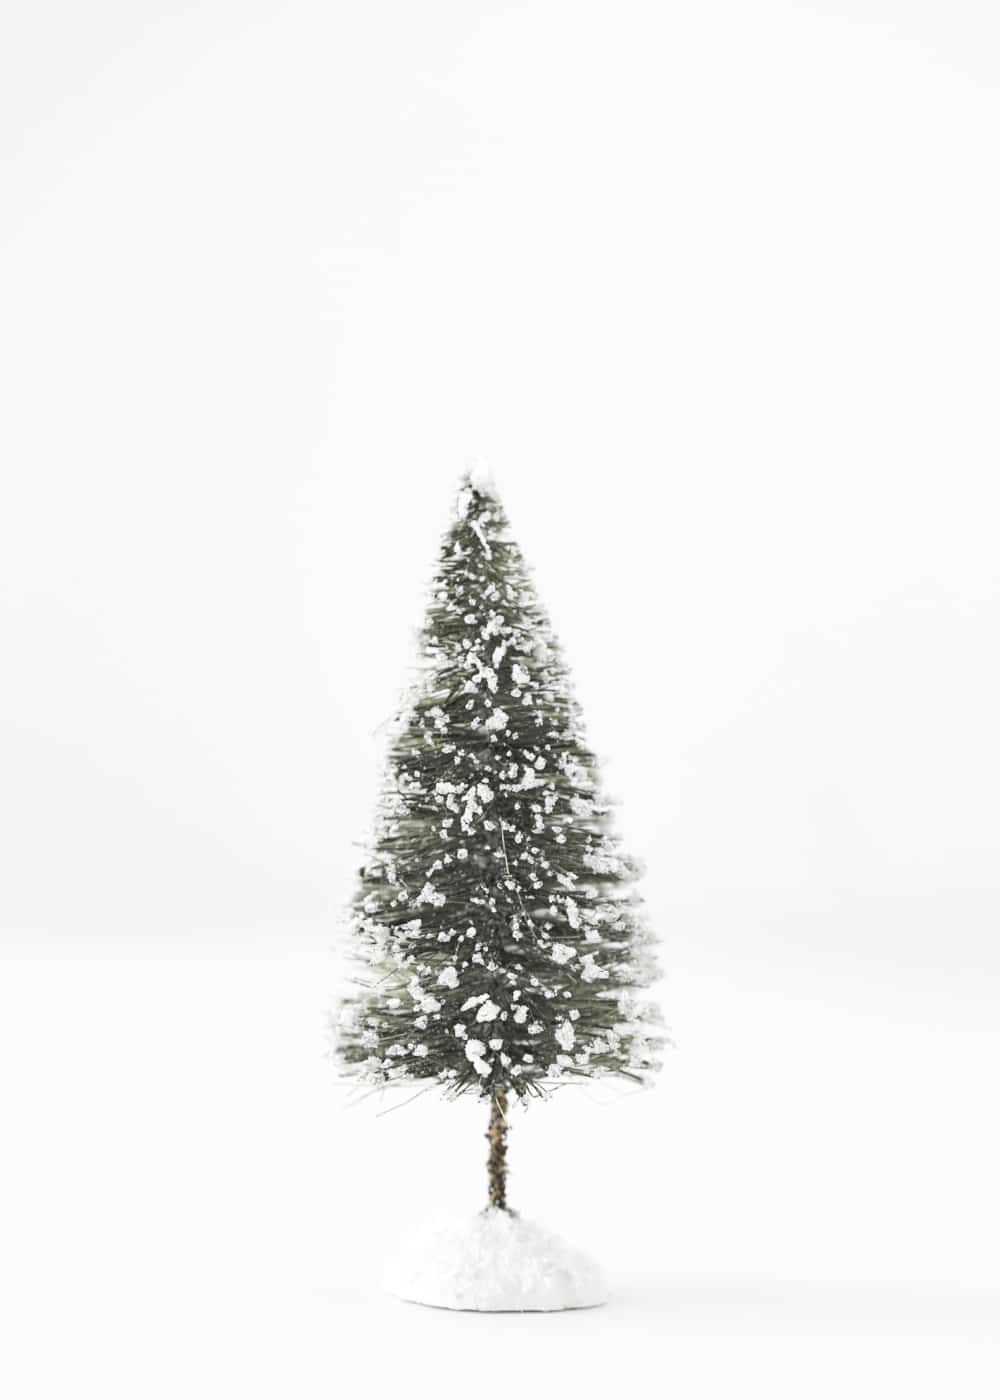 The Most Eco-Friendly Christmas Tree Options & Decorations of 2022